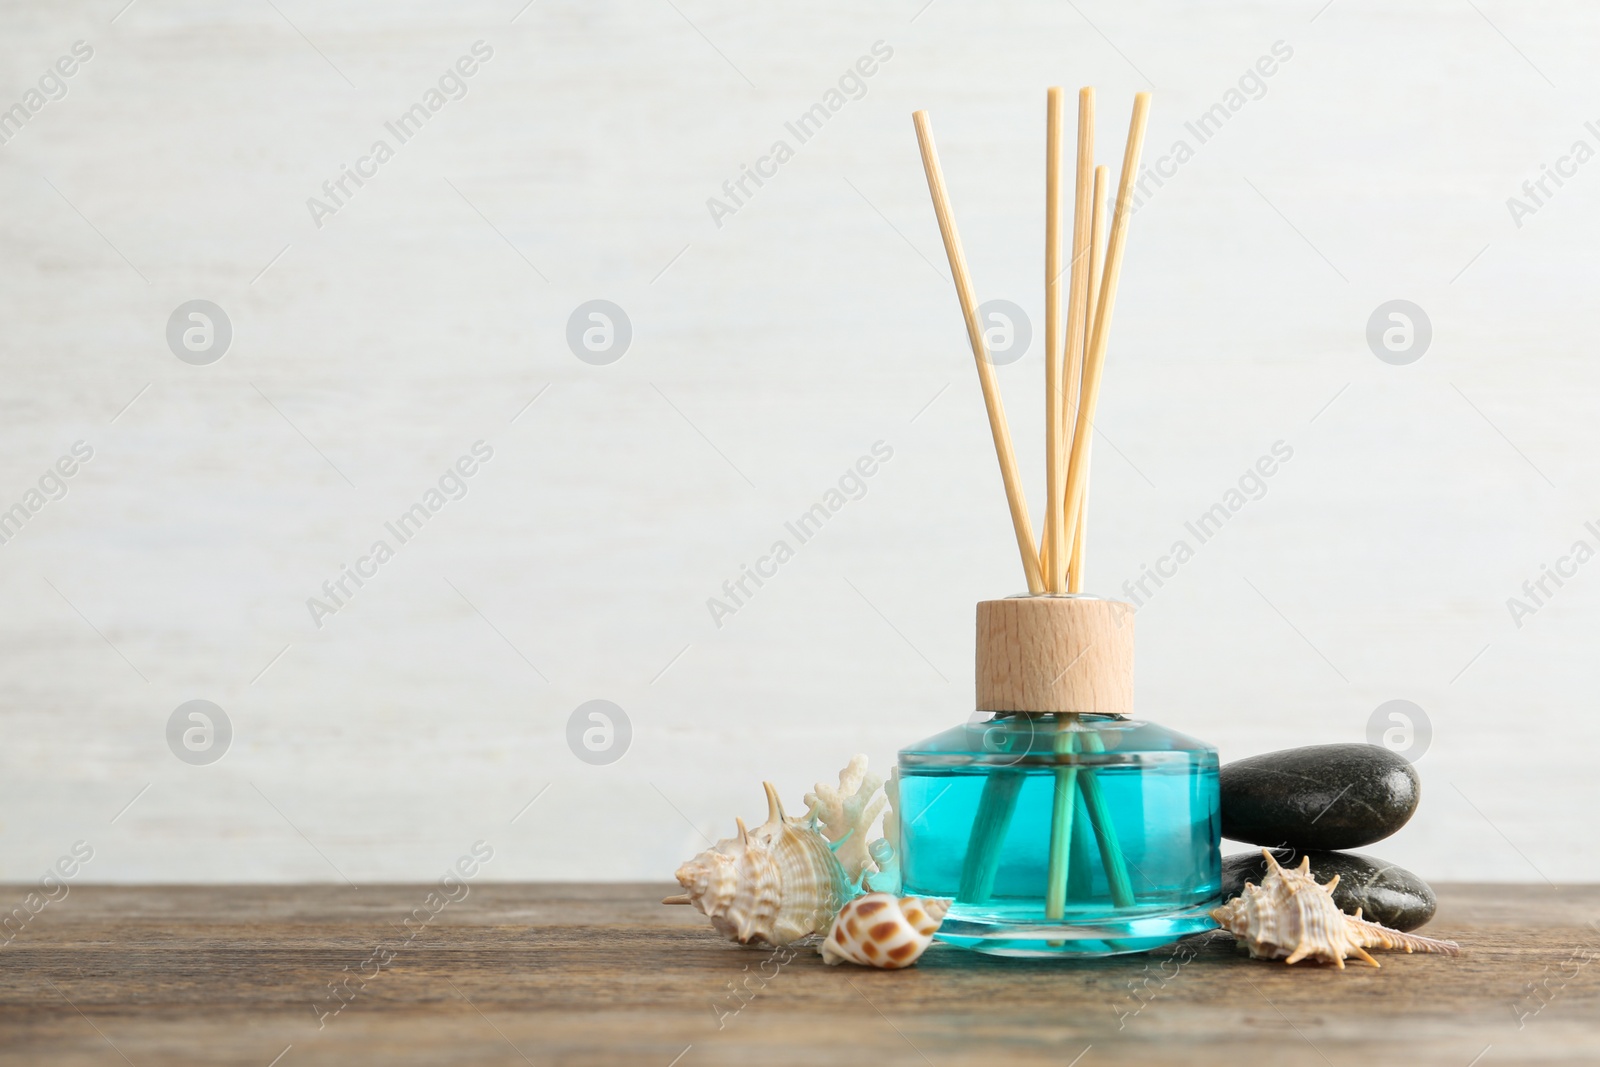 Photo of Aromatic reed freshener, spa stones and sea shells on wooden table against light background. Space for text